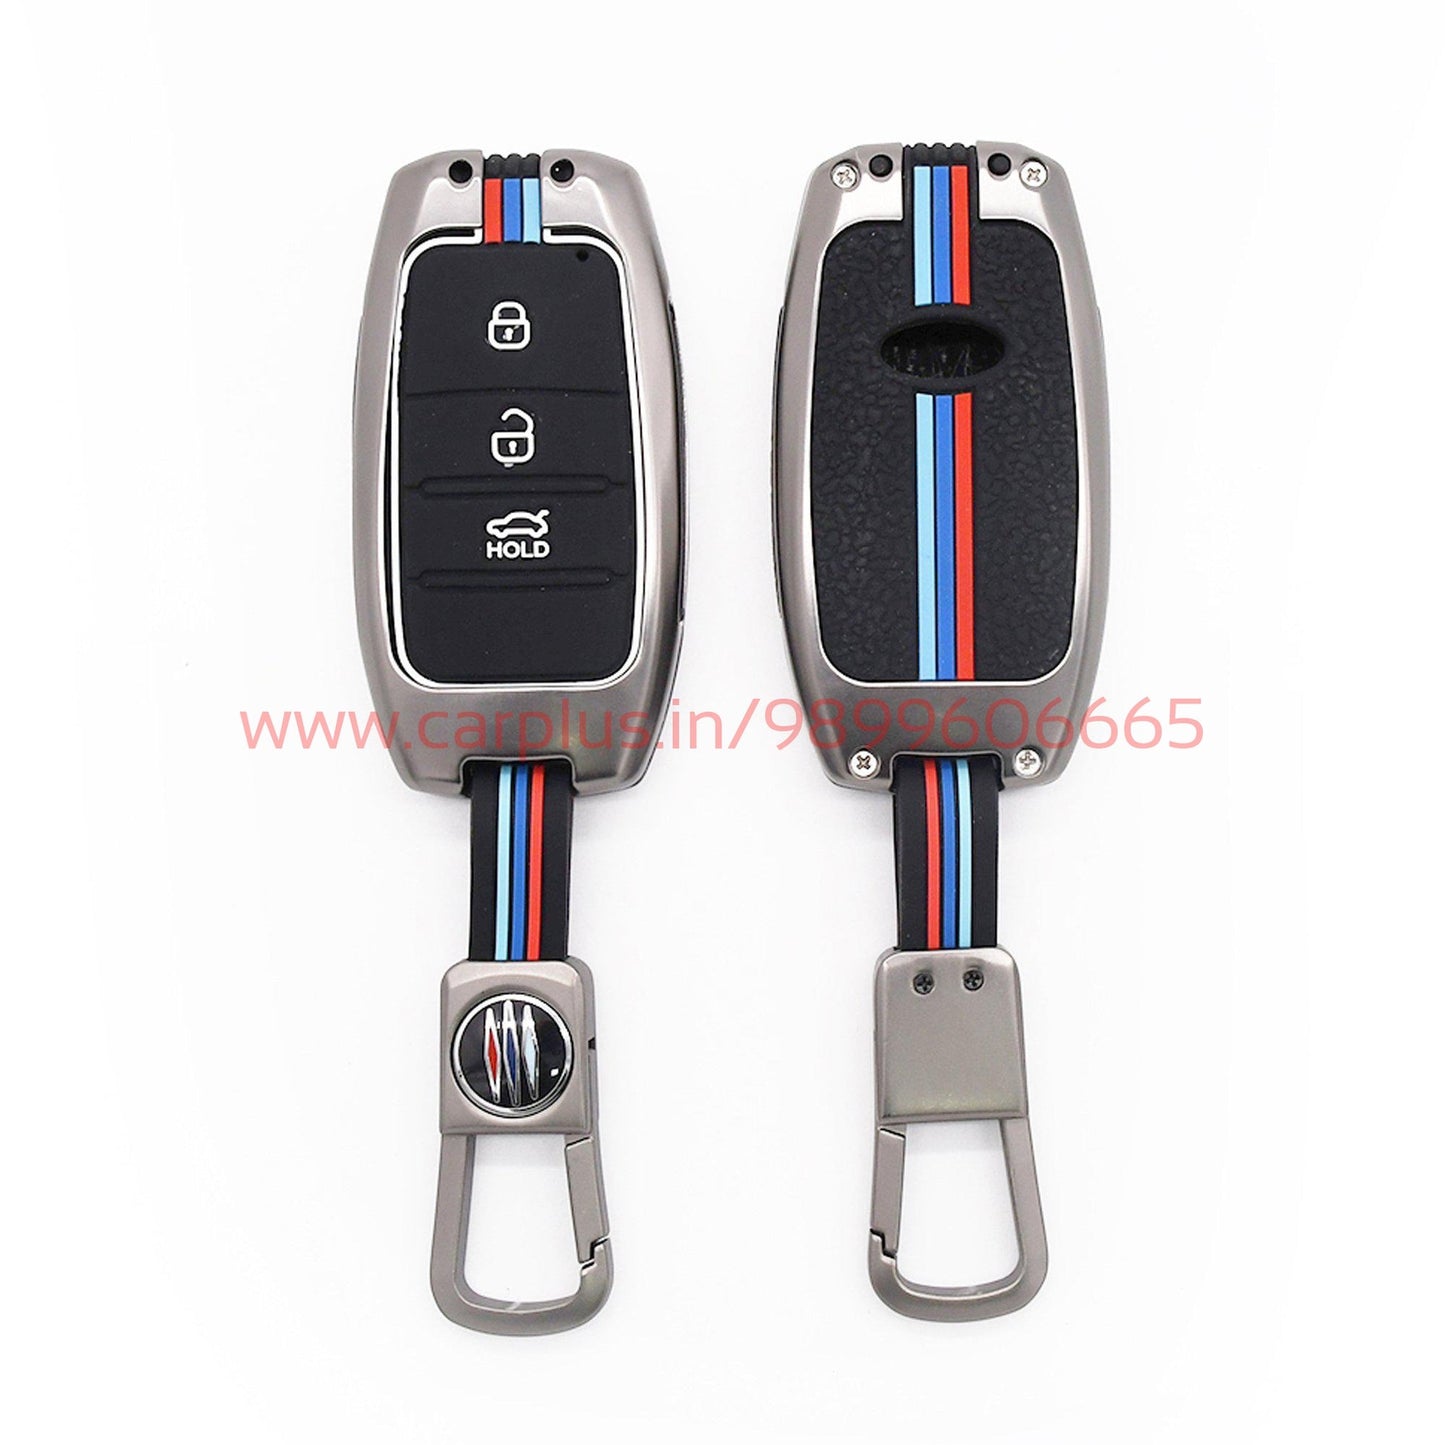 https://cdn.shopify.com/s/files/1/0313/1444/4421/products/KMH-Metal-With-Silicone-Car-Key-Cover-for-Kia-D2-METAL-KEY-COVER-KMH-KEY-COVER_1445x.jpg?v=1657650269